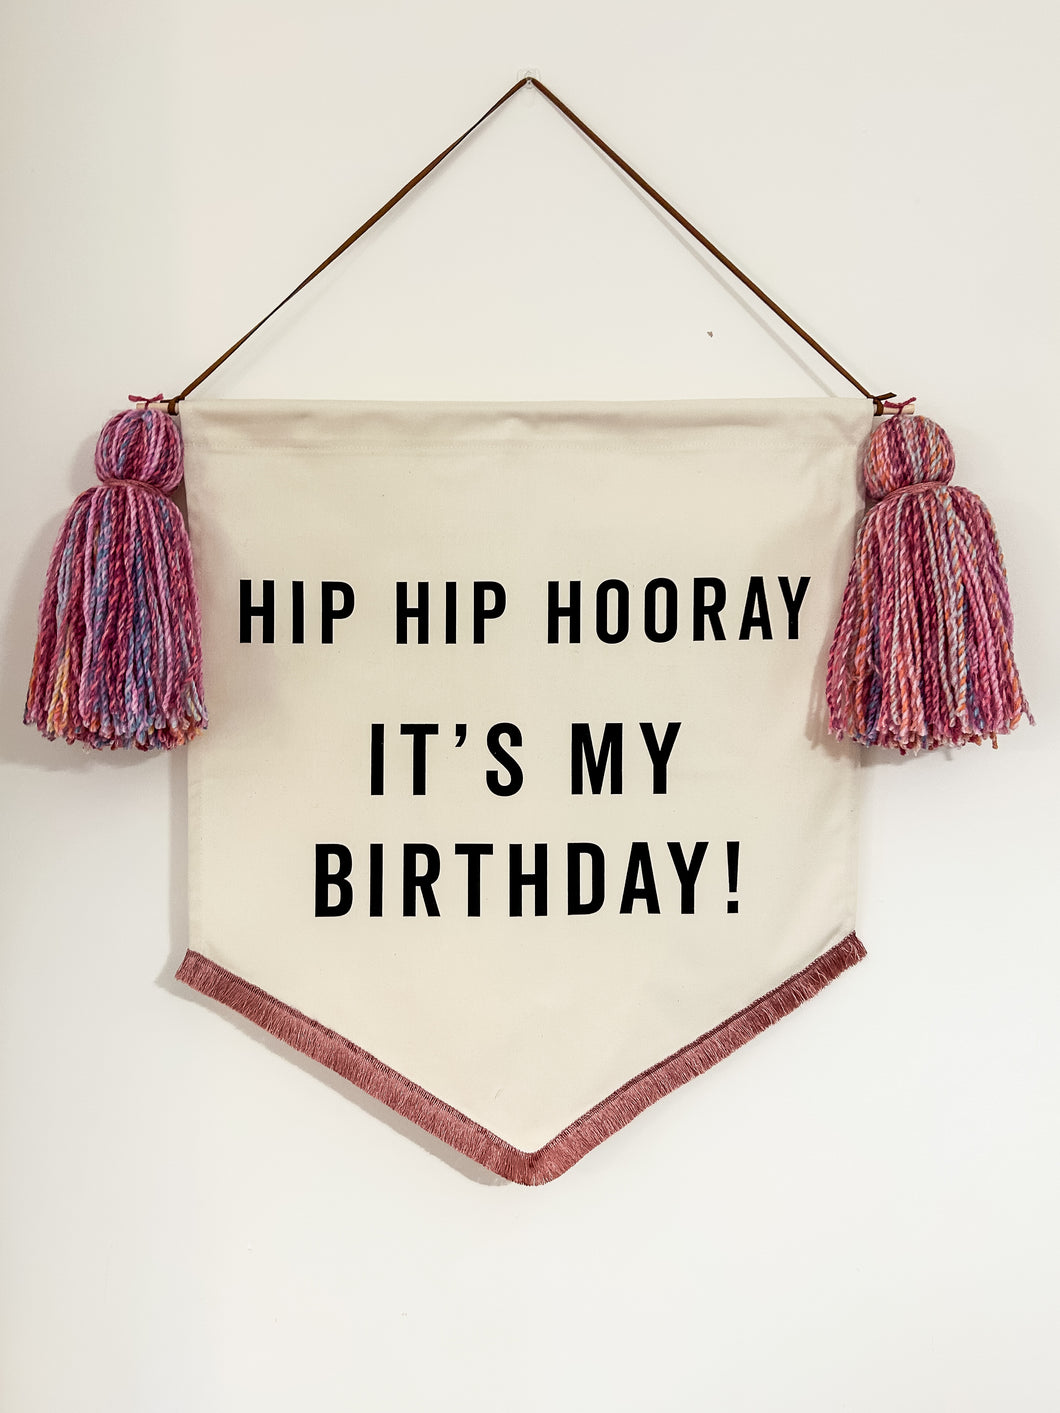 2. Limited Edition ‘Hip Hip Hooray It’s My Birthday’ Large Banner